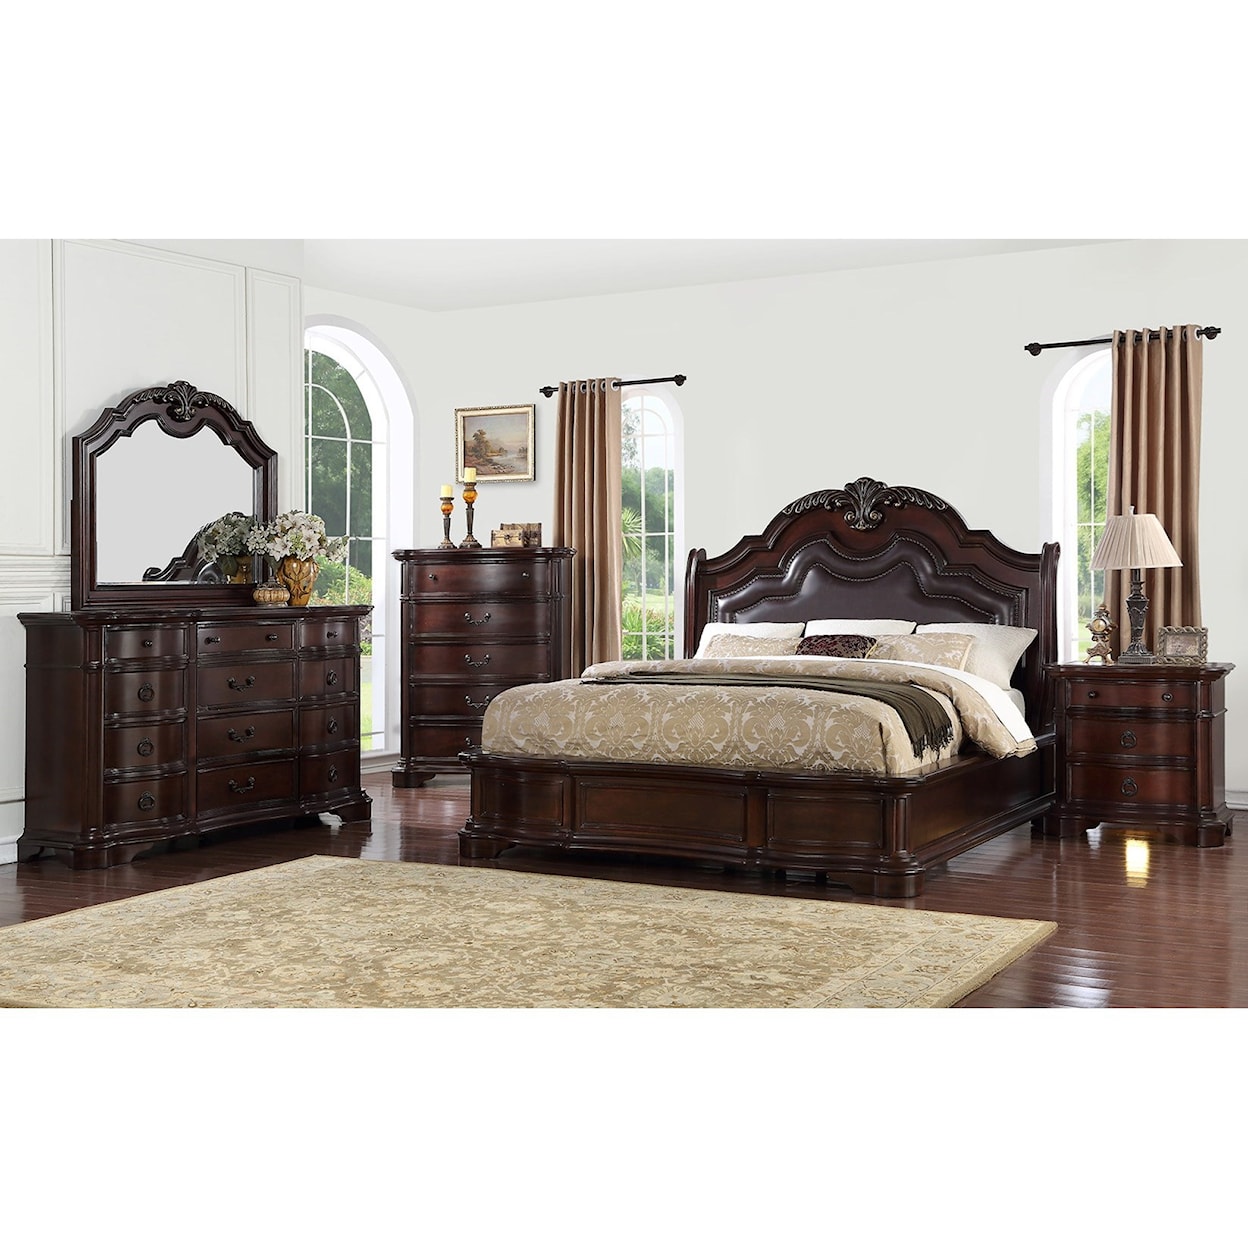 Avalon Furniture St Louis King Bedroom Group